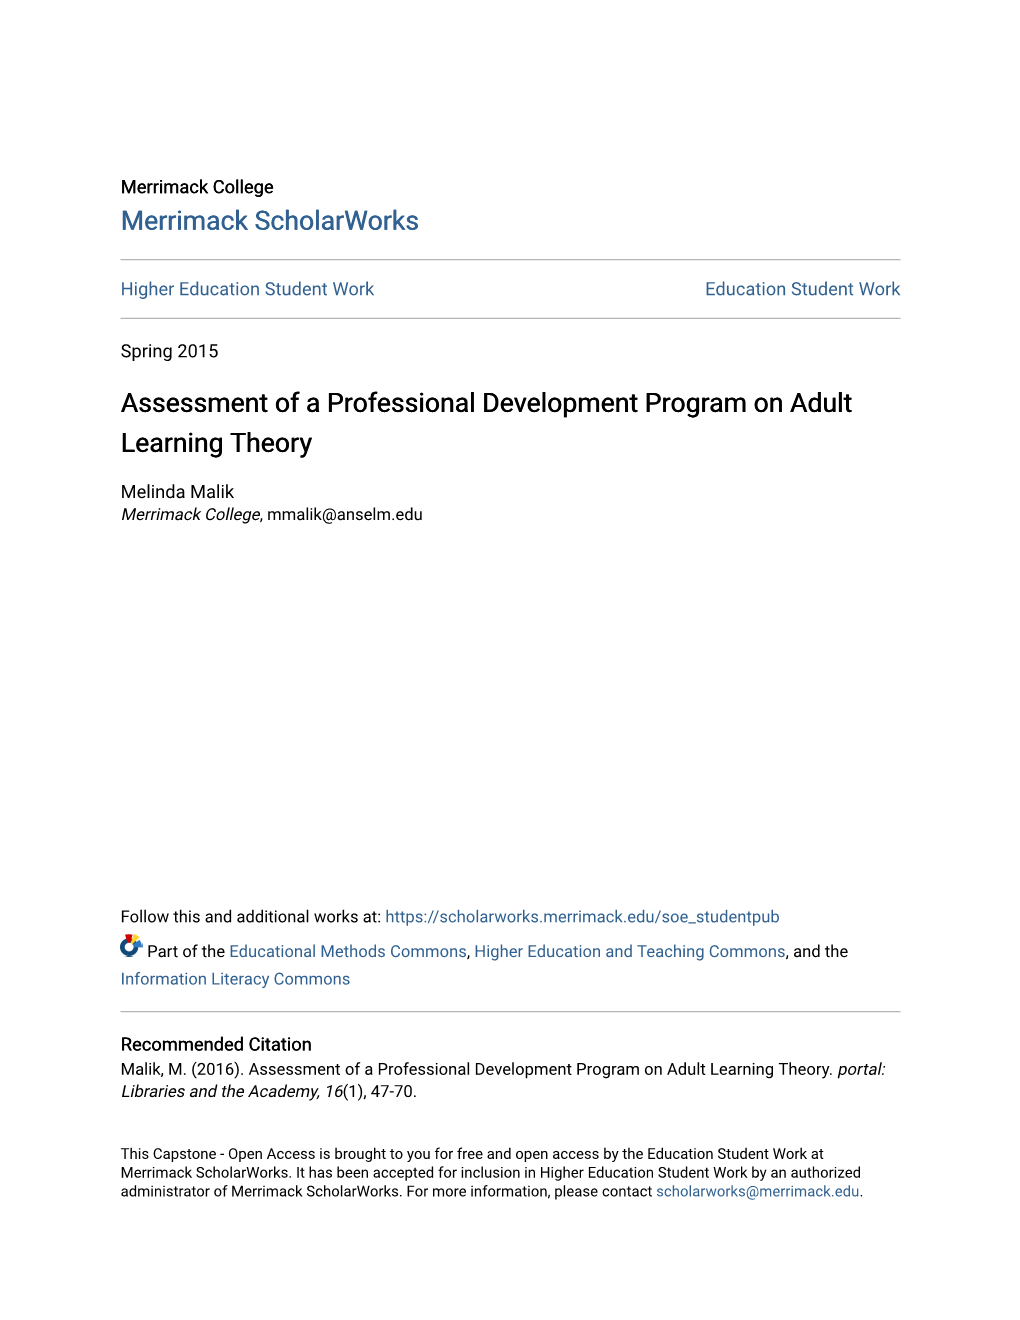 Assessment of a Professional Development Program on Adult Learning Theory